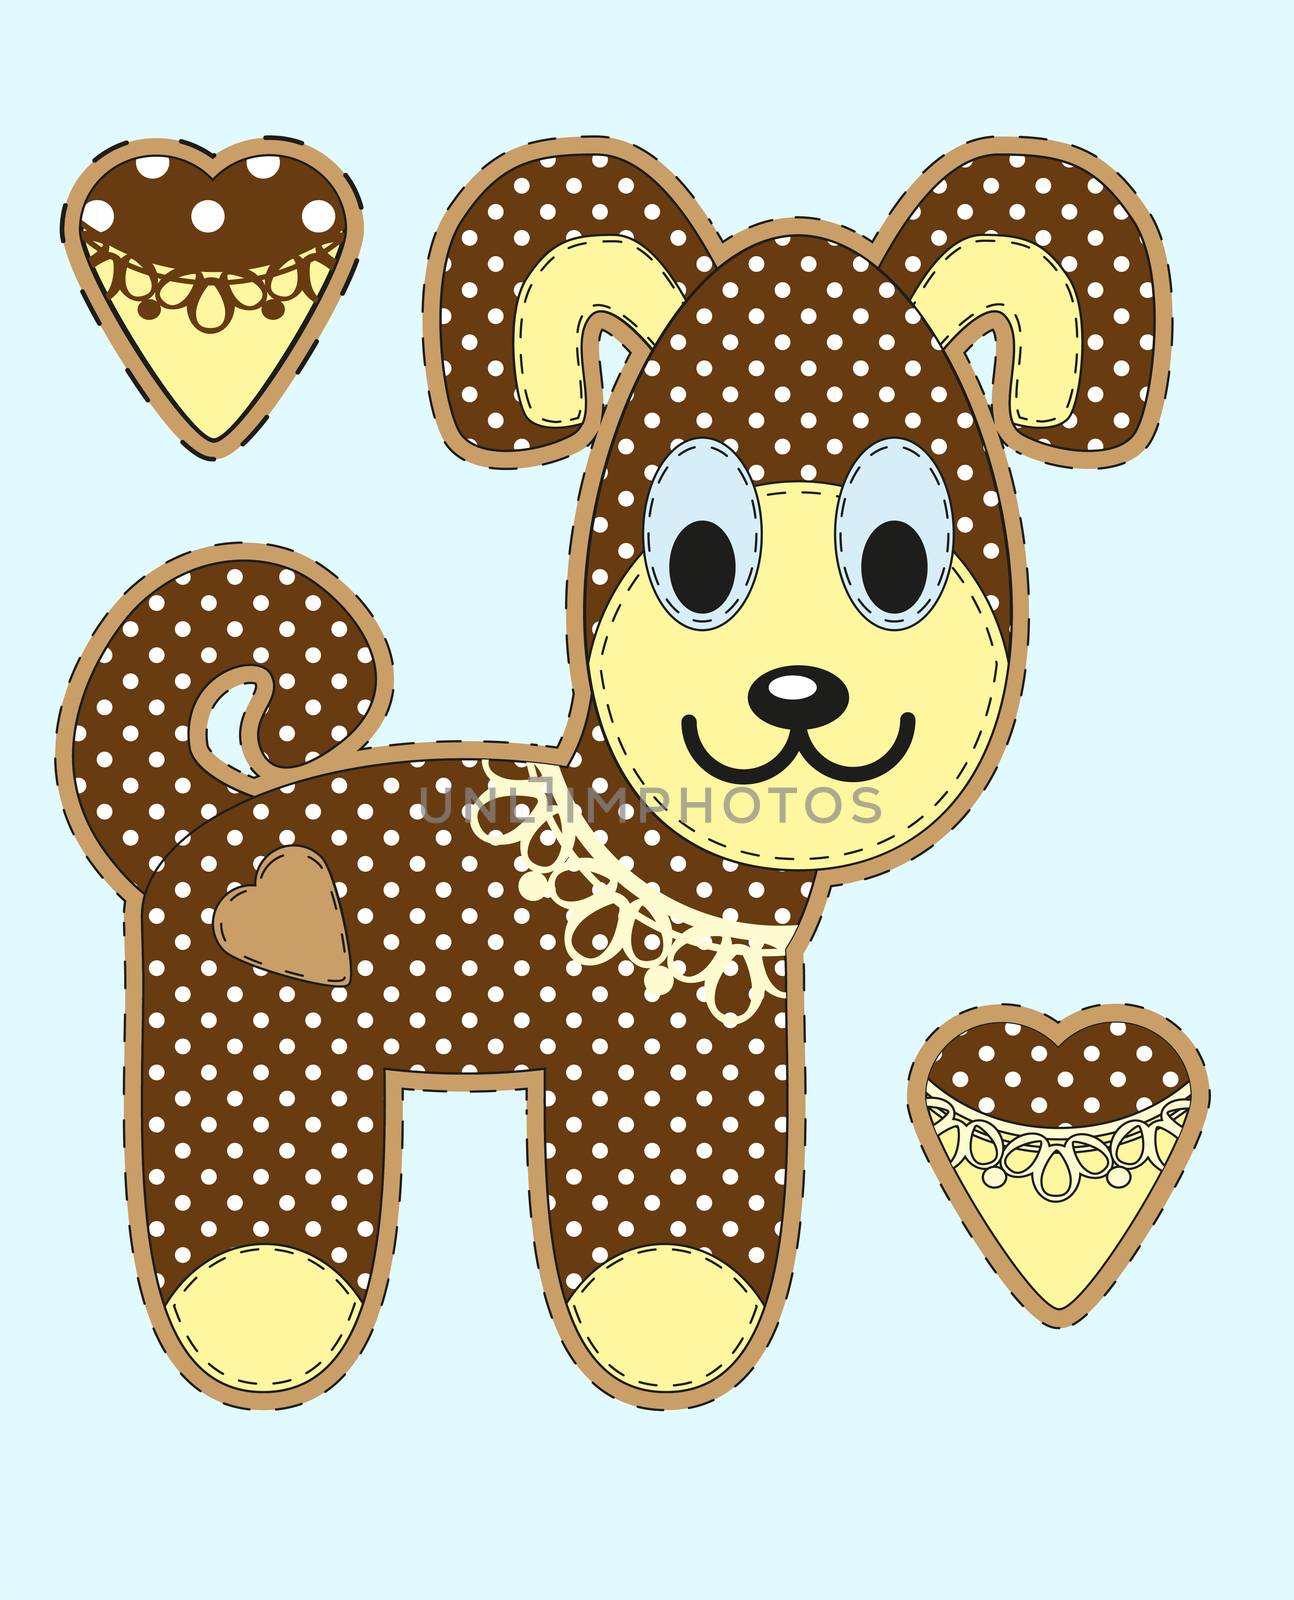 Cute cartoon dog in flat design for greeting card, invitation and logo with fabric texture. illustration